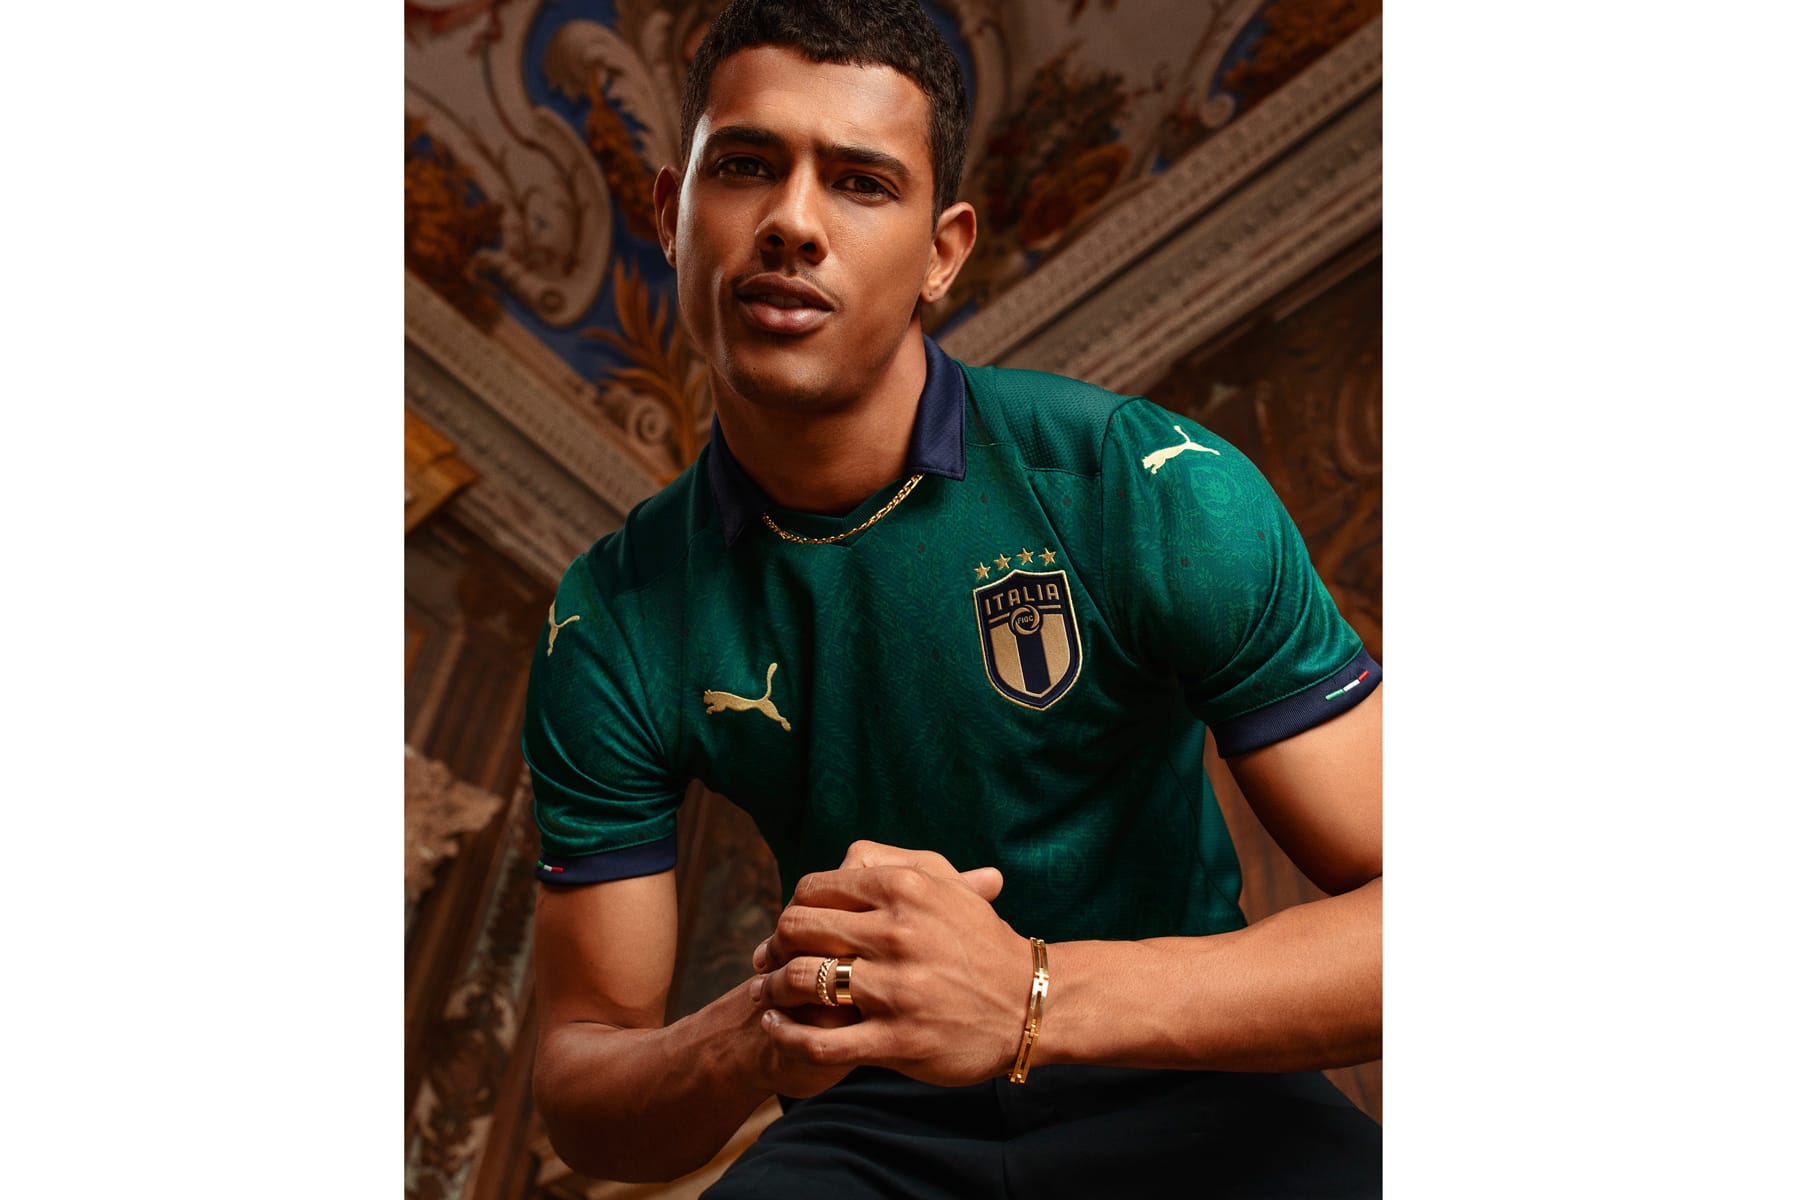 italy national team jersey 2019